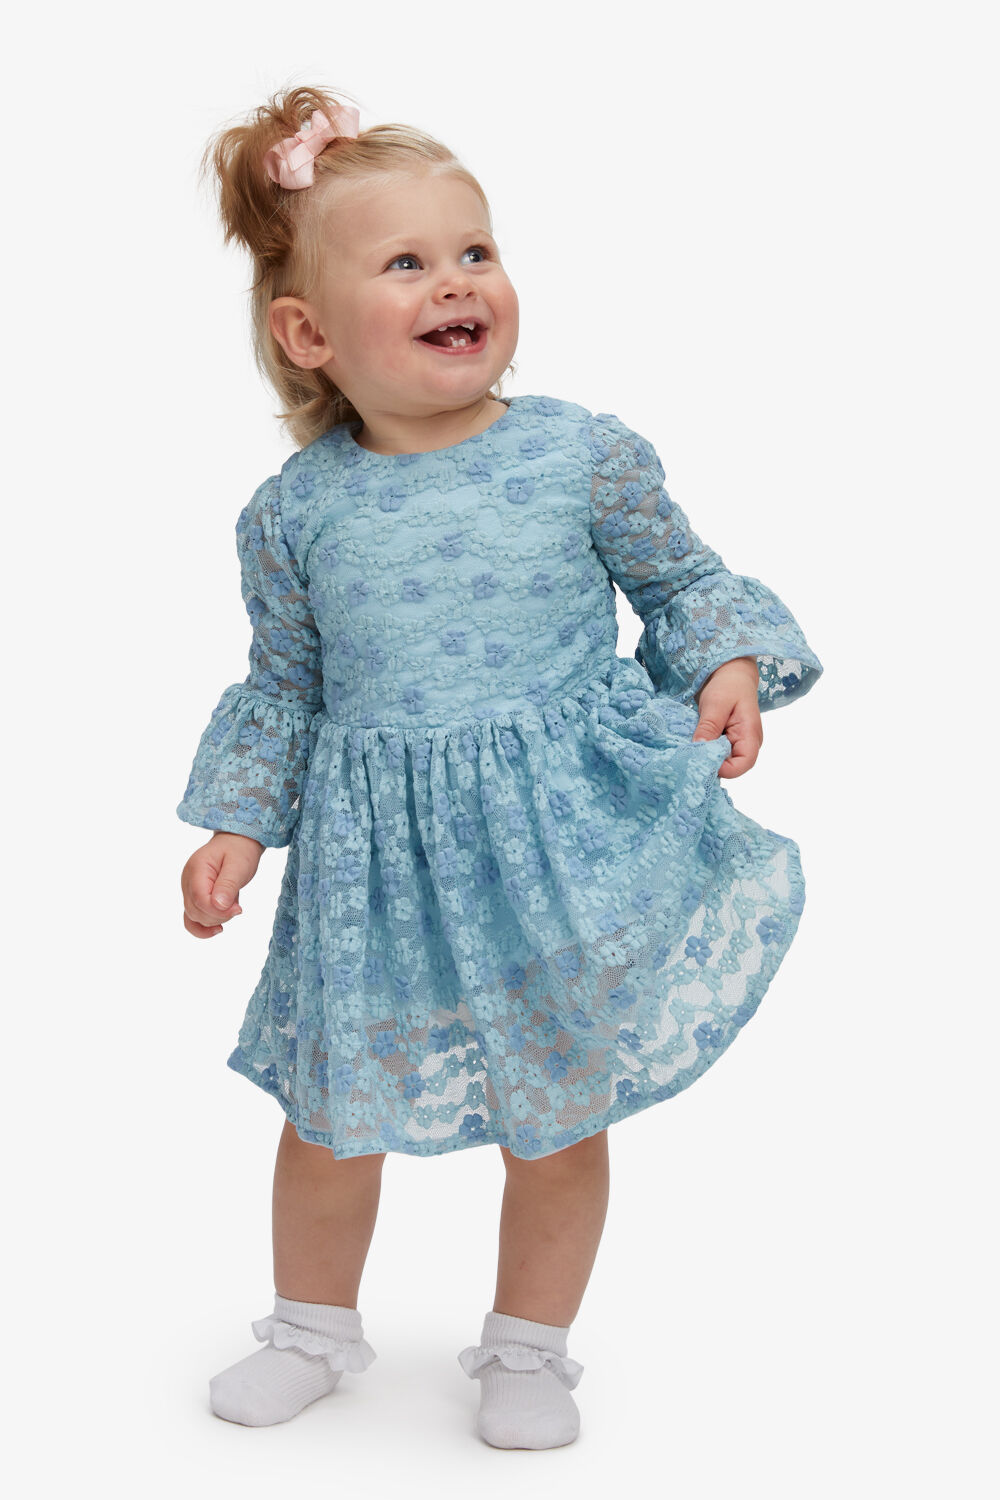 ELOISE LACE DRESS in colour BABY BLUE